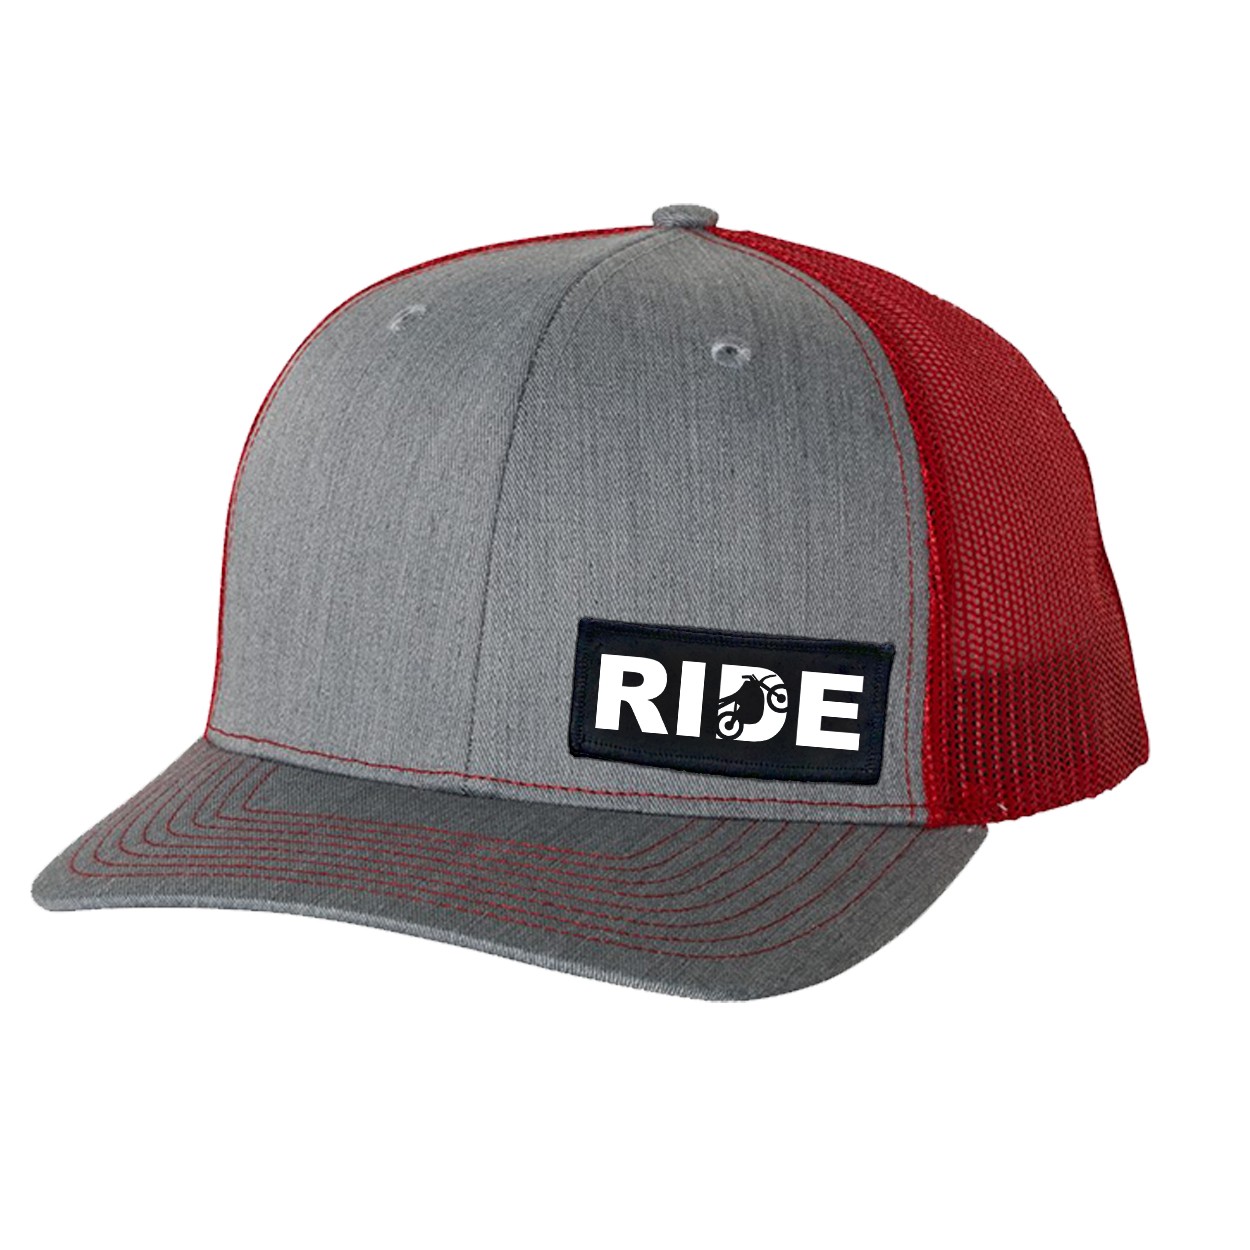 Ride Moto Logo Night Out Woven Patch Snapback Trucker Hat Heather Heather Grey/Red (White Logo)